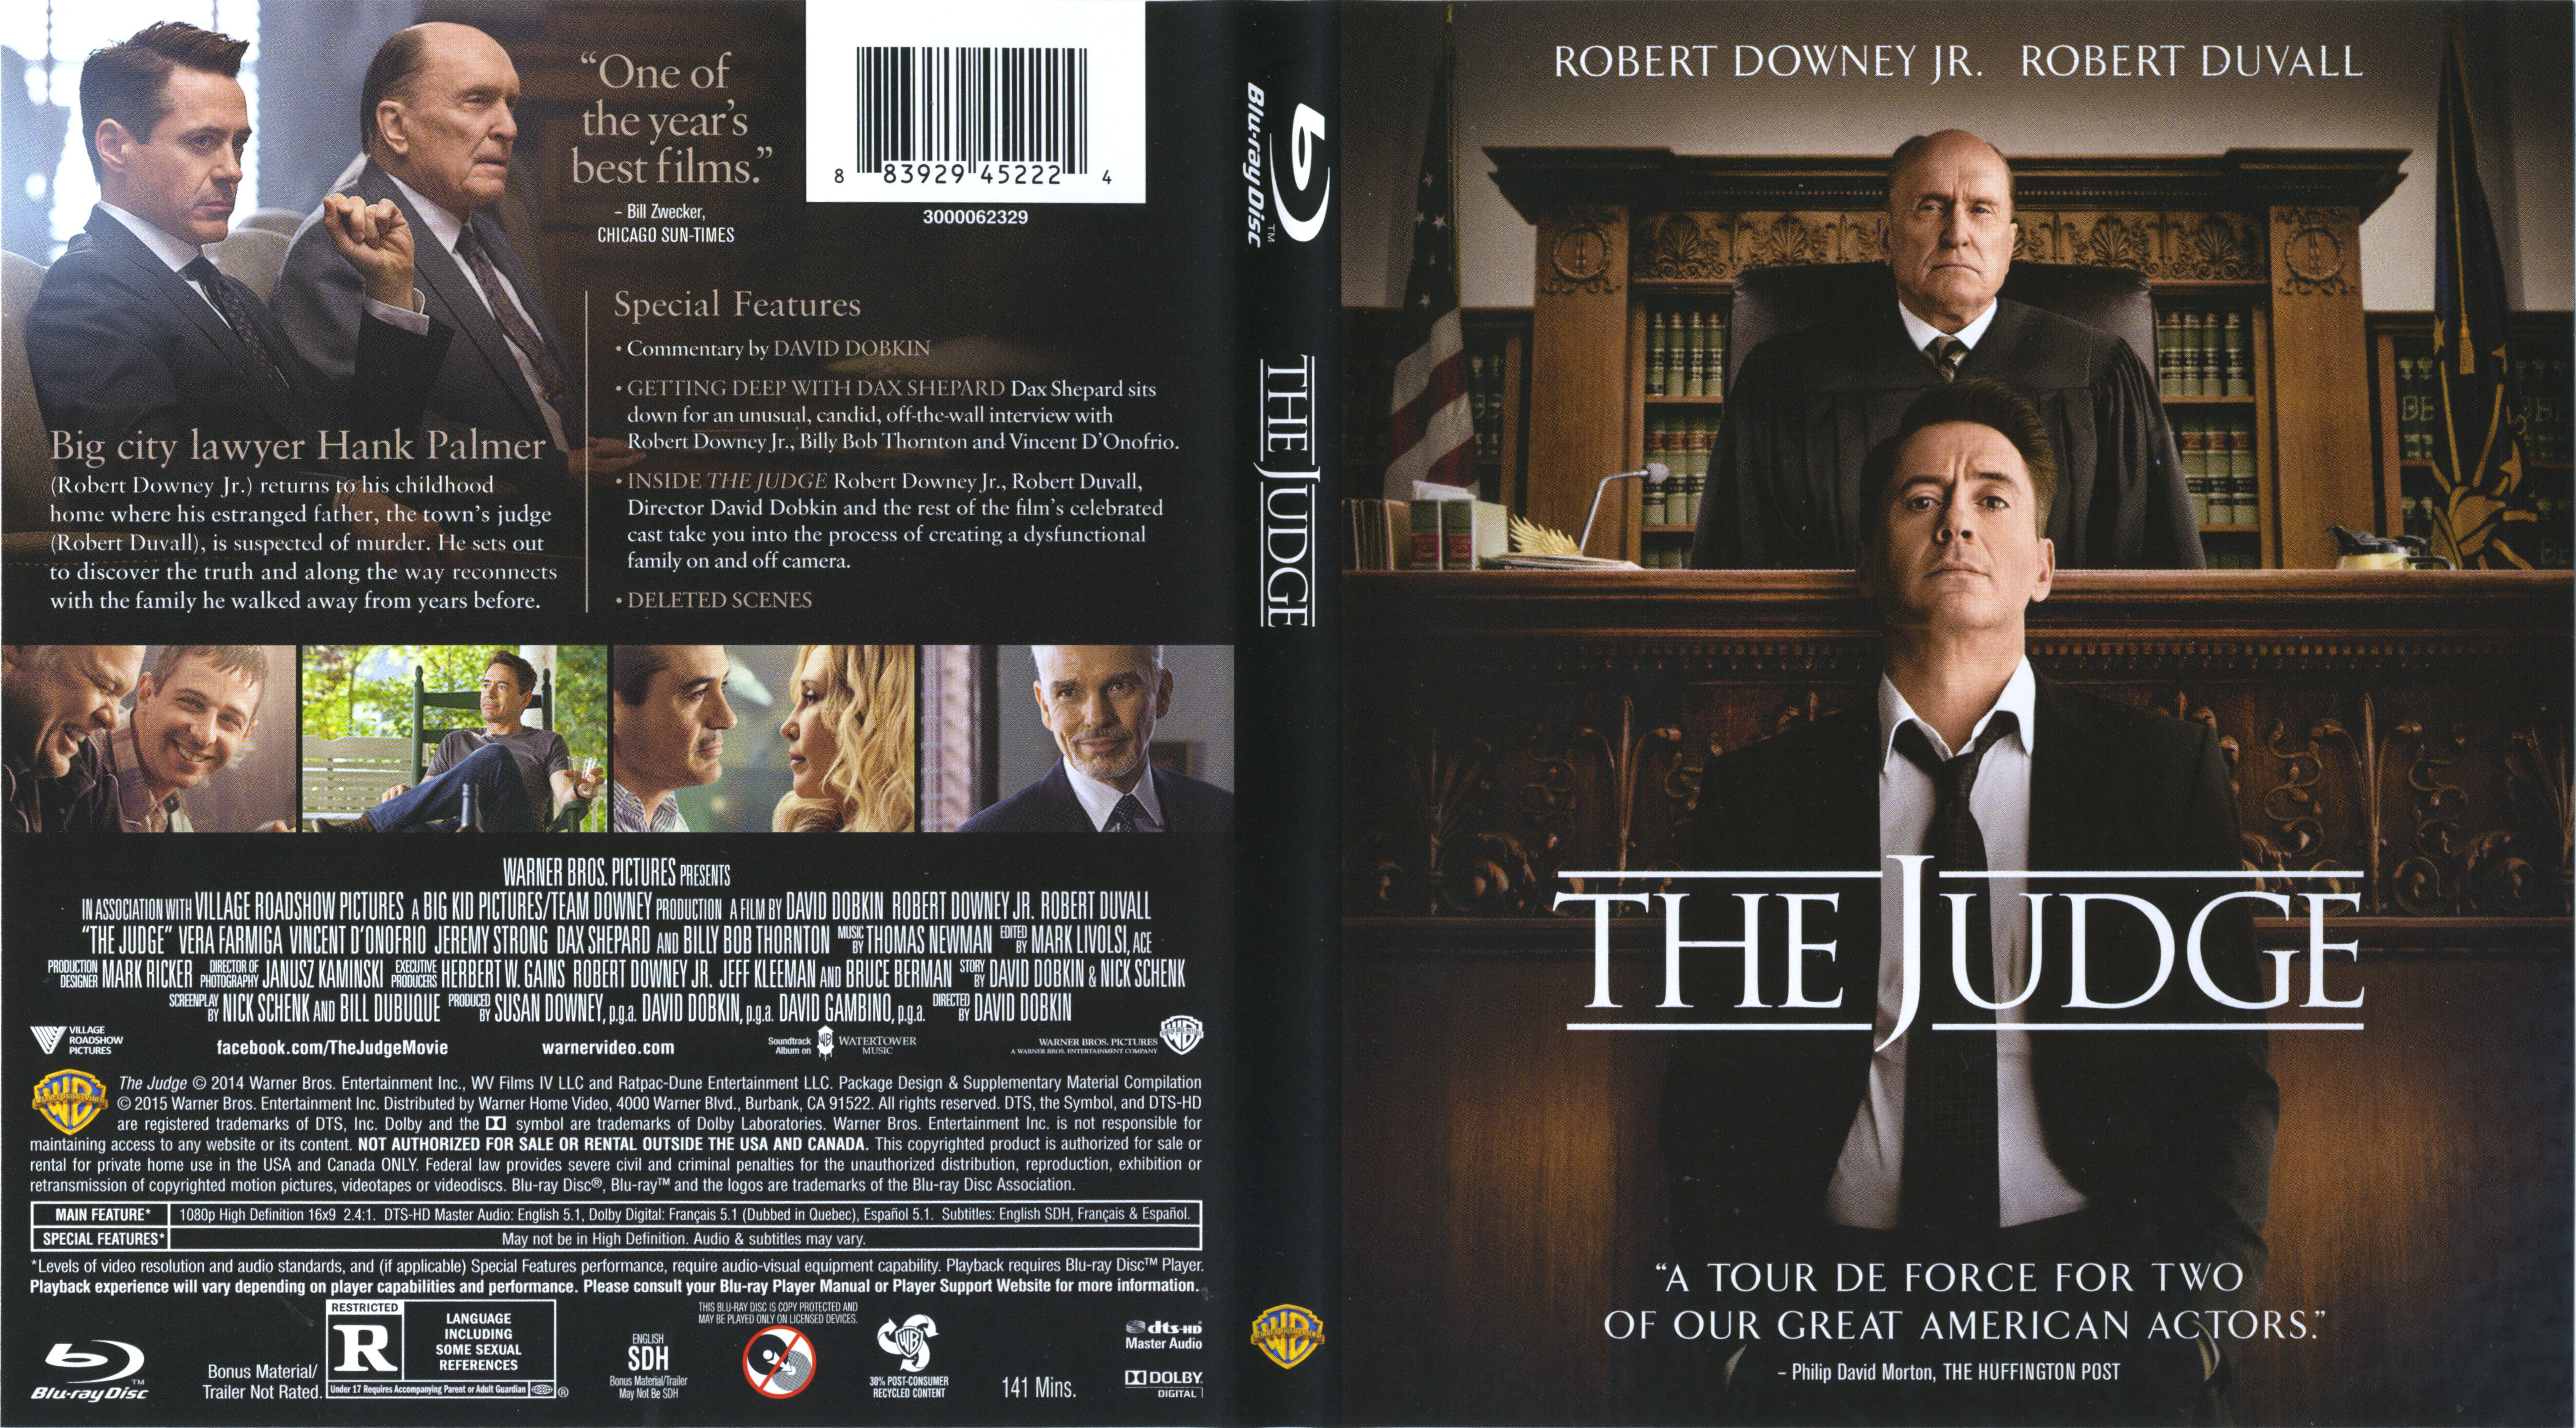 Jaquette DVD The judge - Le juge Zone 1 (BLU-RAY)